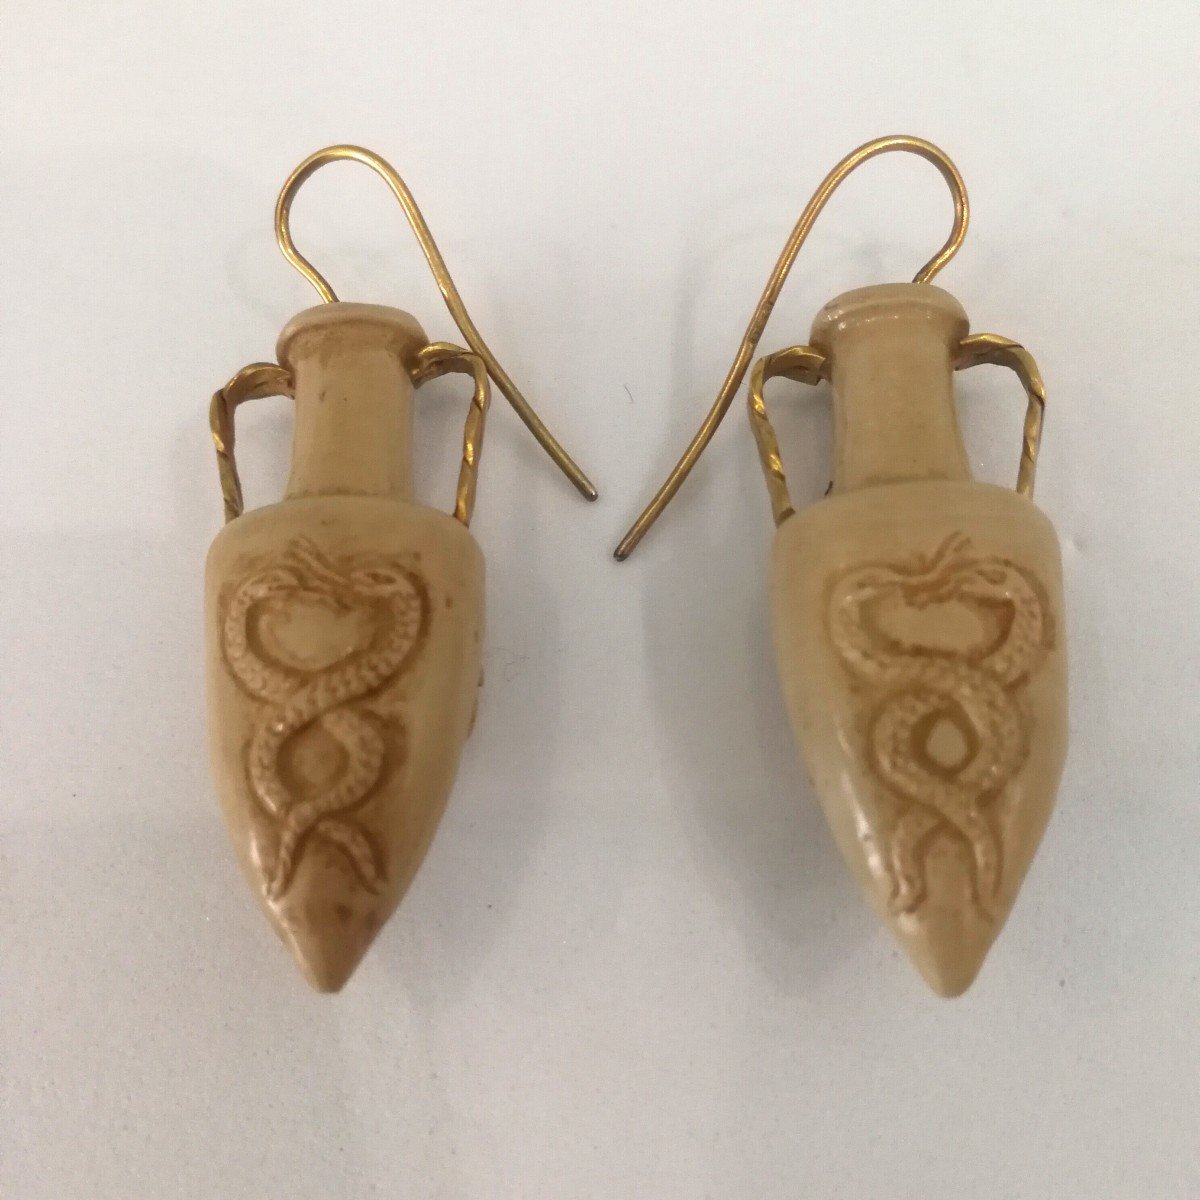 Earrings In The Shape Of Amphora Gold And Lava Stone, Italy Late 19th Century.-photo-3